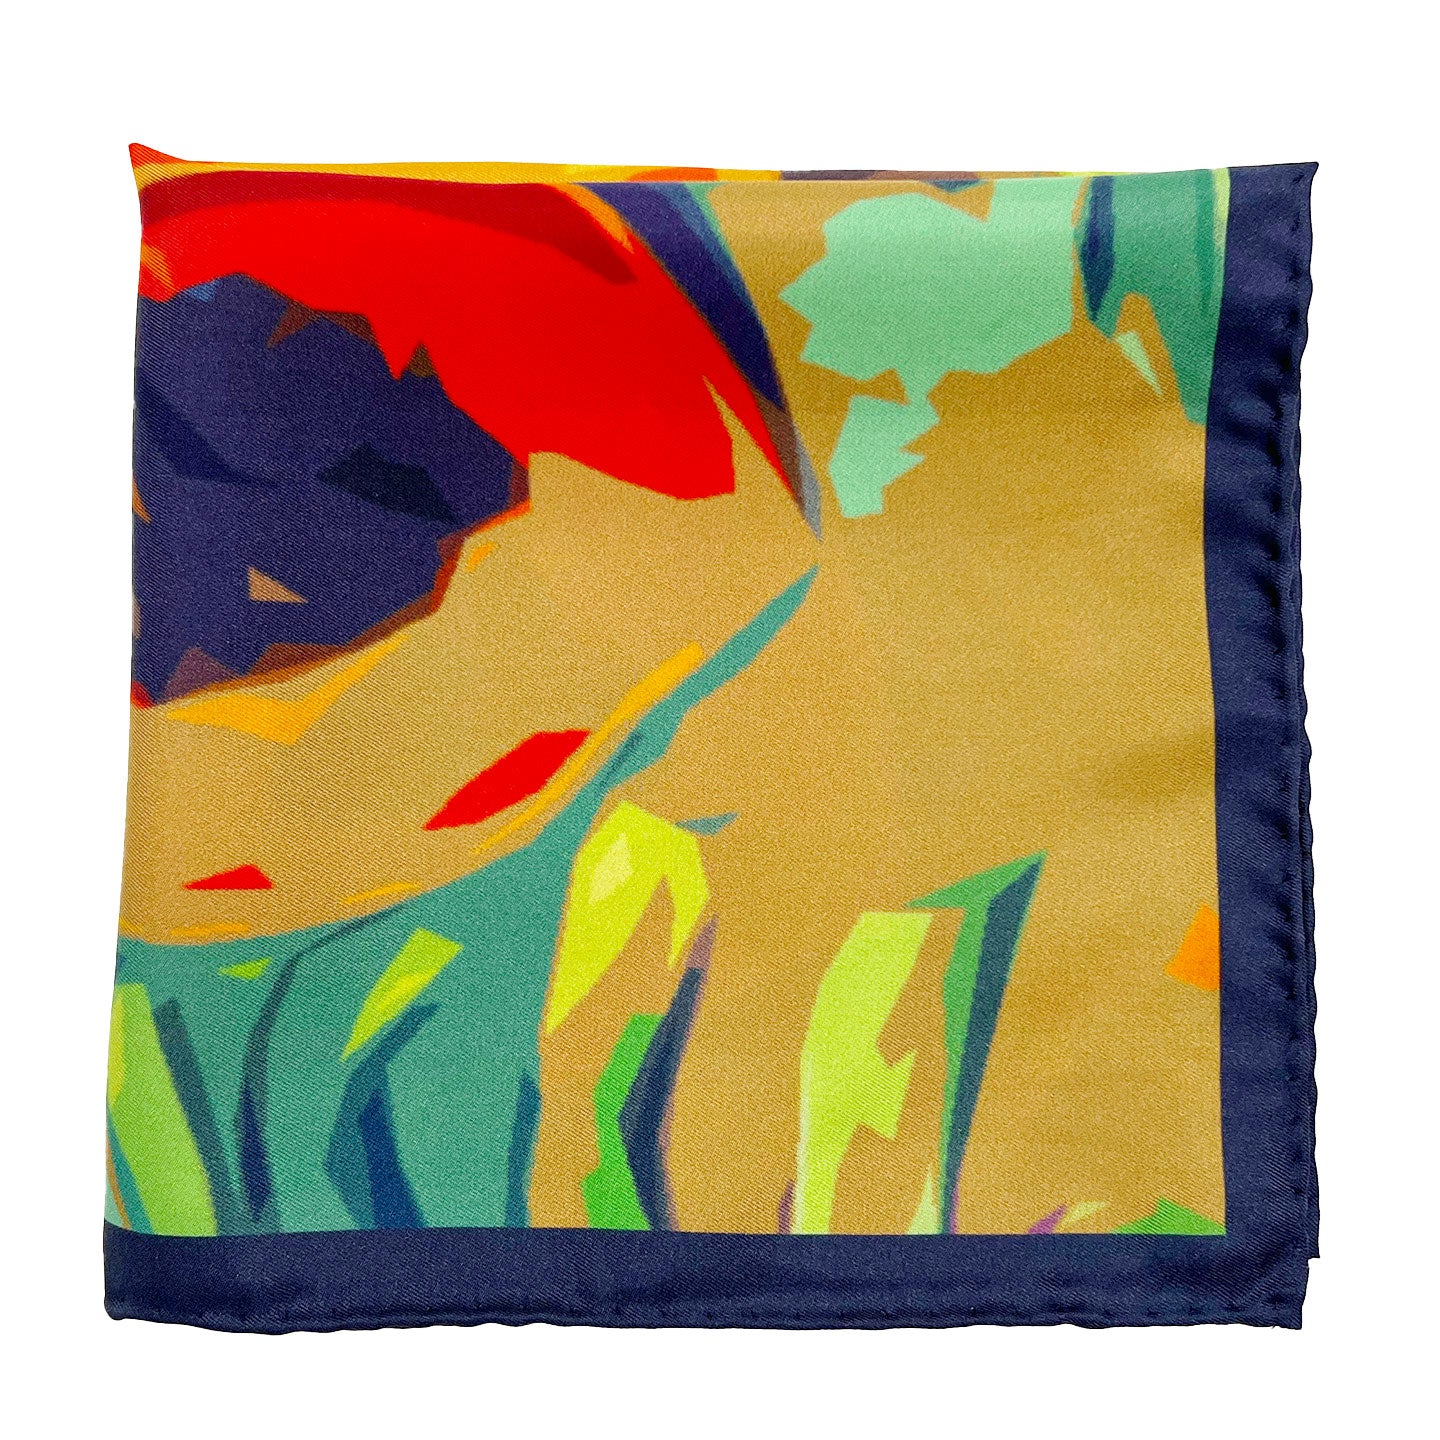 The 'Derwent' silk pocket square from SOHO Scarves folded into a quarter, showing the colourful tropical pattern, framed with a blue border.